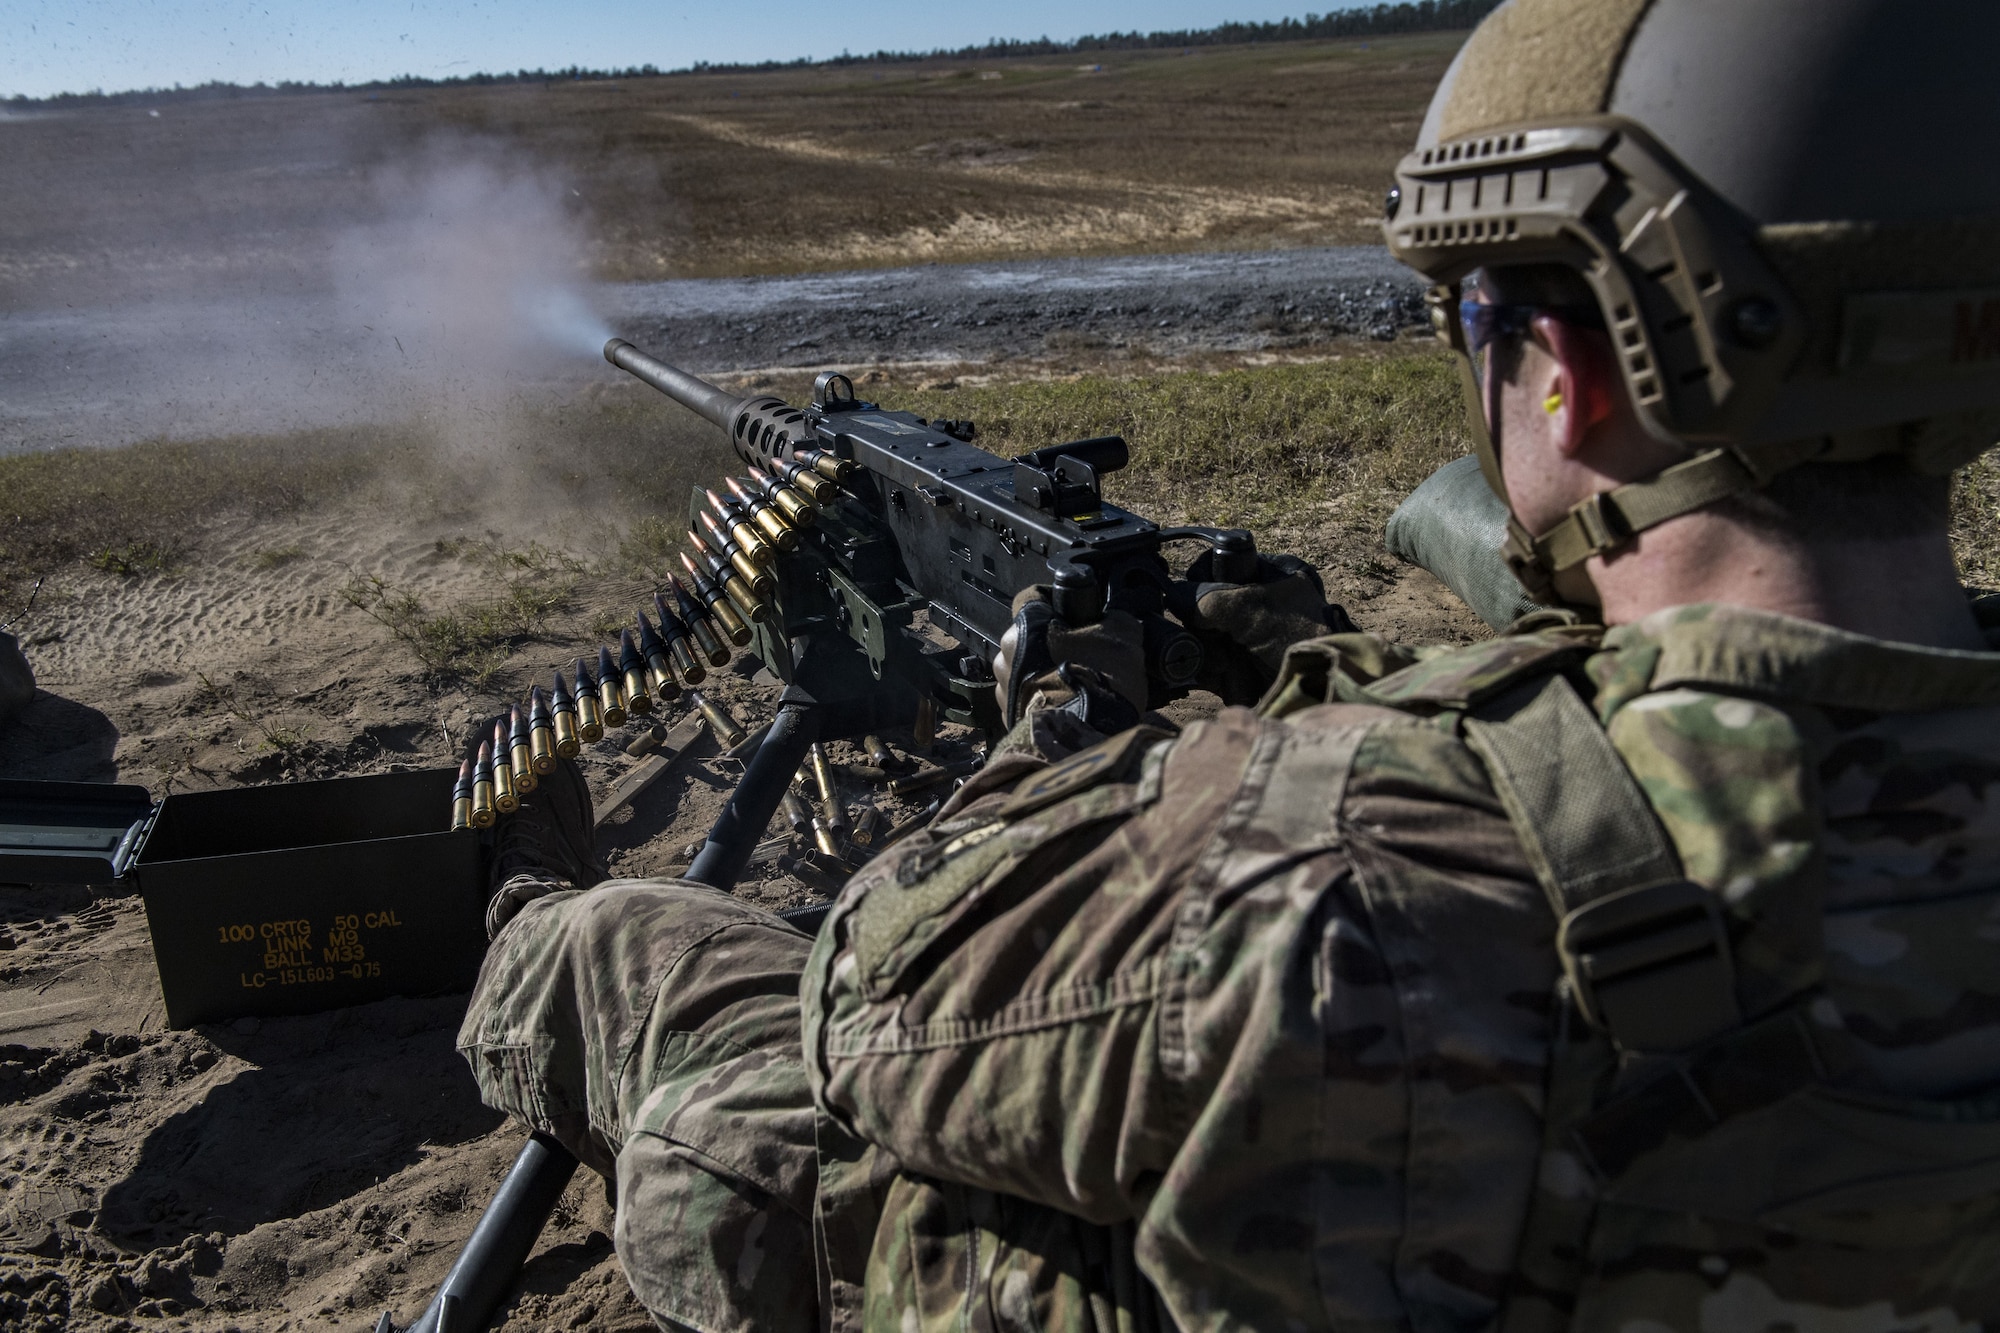 Staff Sgt. Richard Murkin, 823d Base Defense Squadron fireteam member, fires a .50 Caliber M2 machine gun during a heavy weapons qualification, Dec. 13, 2017, at Camp Blanding Joint Training Center, Fla. Airmen shot at targets with the M2 to maintain their proficiency and familiarize themselves with the weapon. (U.S. Air Force photo by Senior Airman Janiqua P. Robinson)